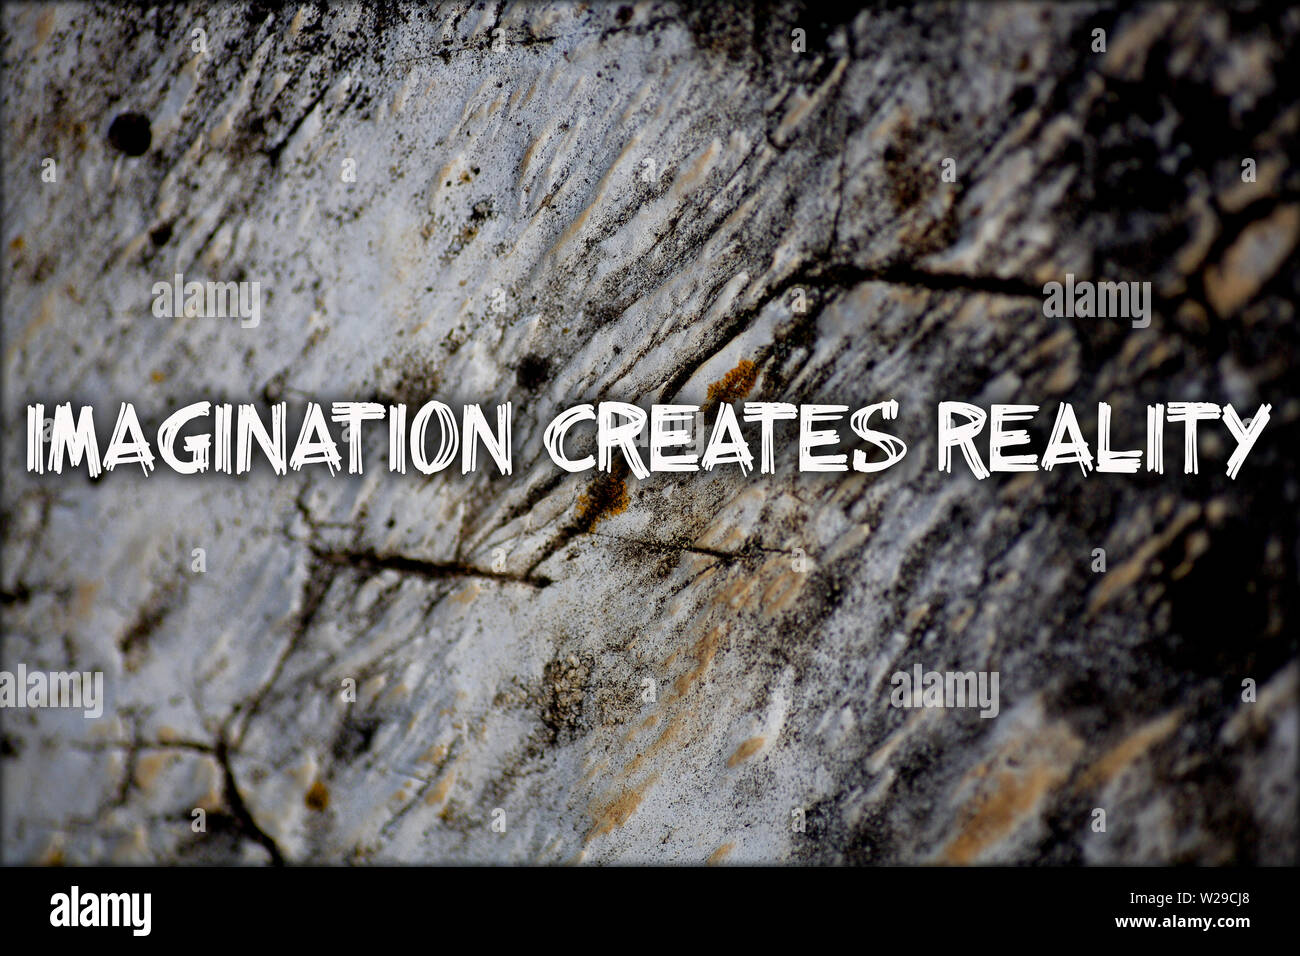 Imagination creates reality quote Time quotes background fine art in high quality prints products Stock Photo